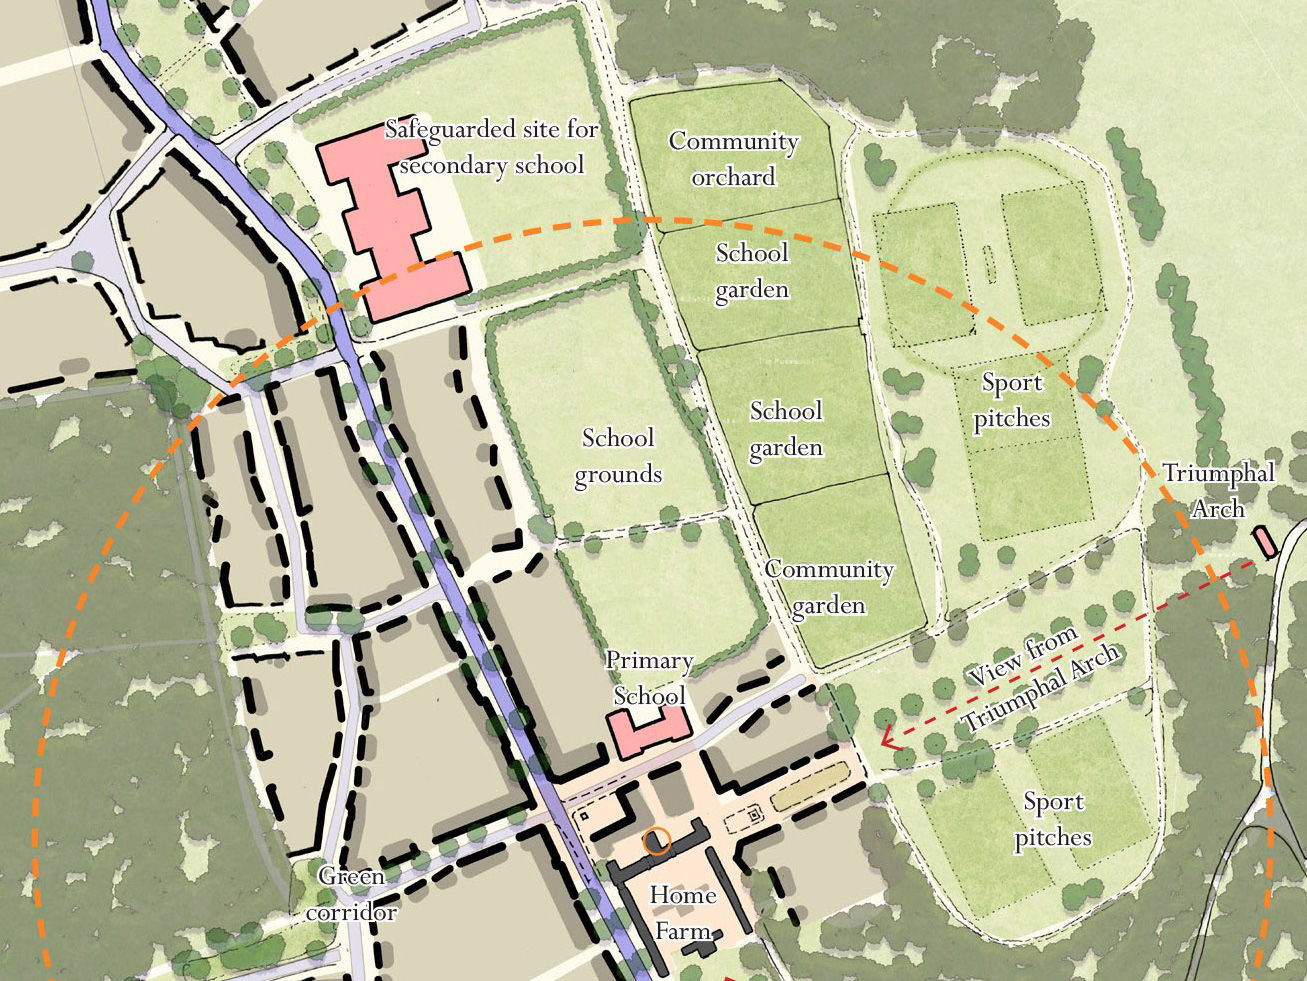 Map of school grounds and school areas within Parlington Village